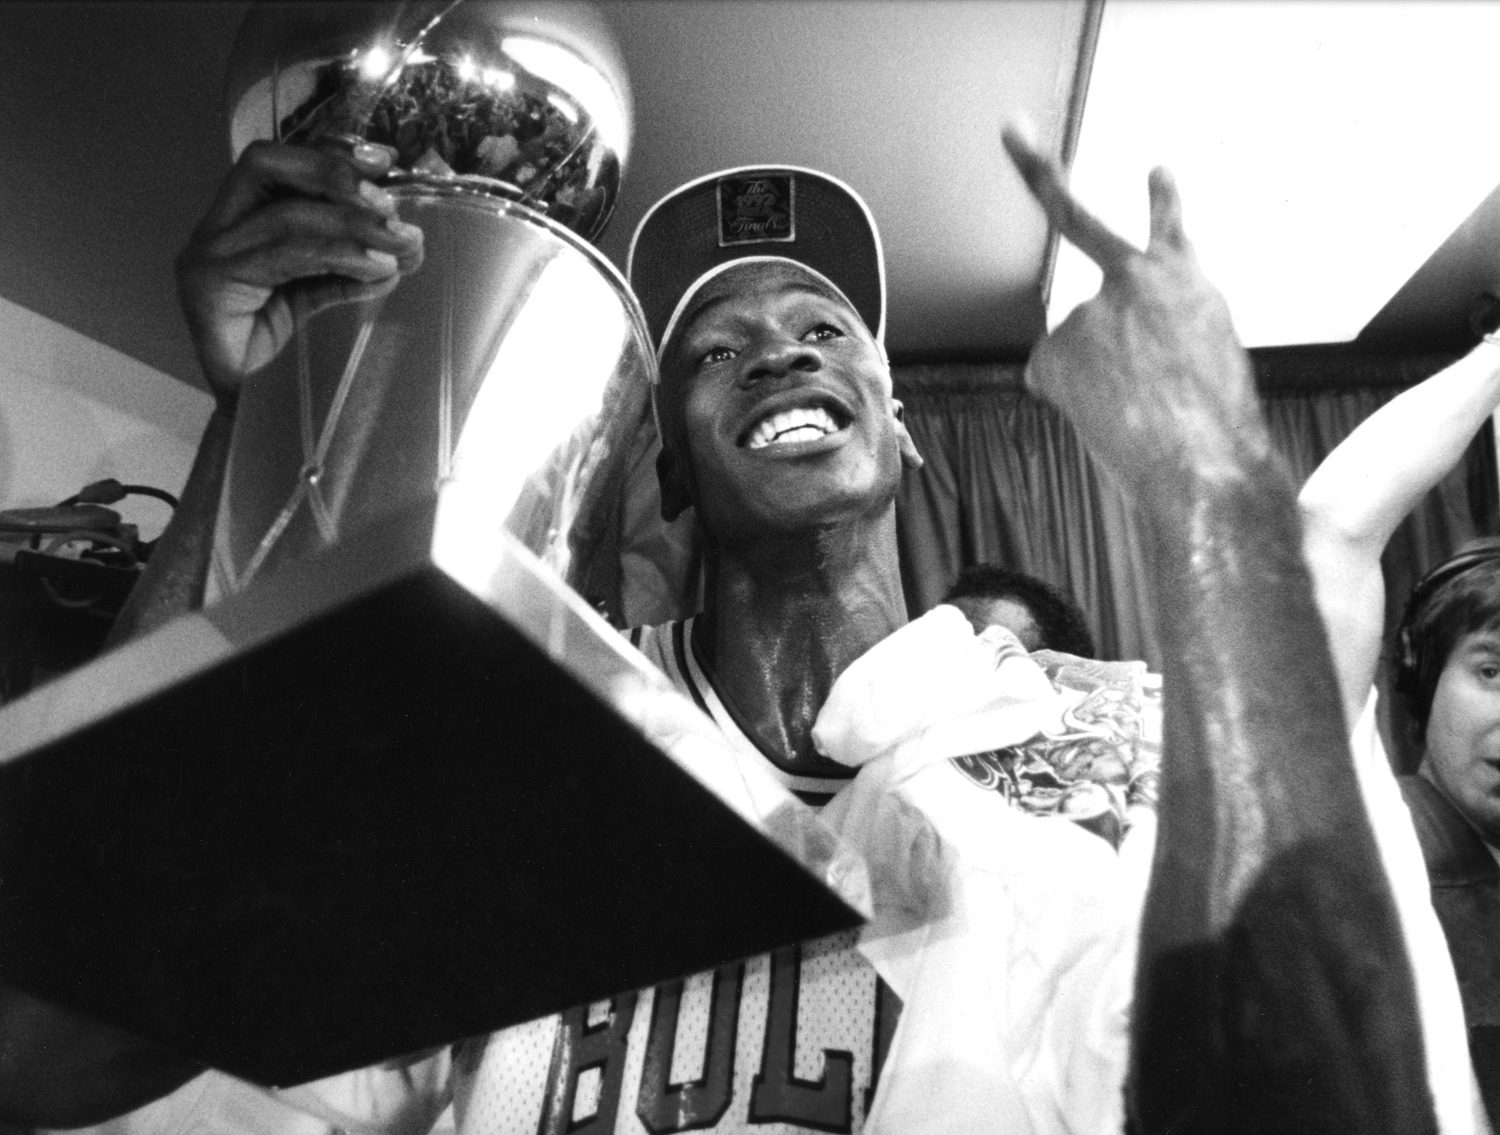 Black and white close up of Michael Jordan holding the championship trophy. The photographer angled the camera up so you can see the bottom of the trophy.